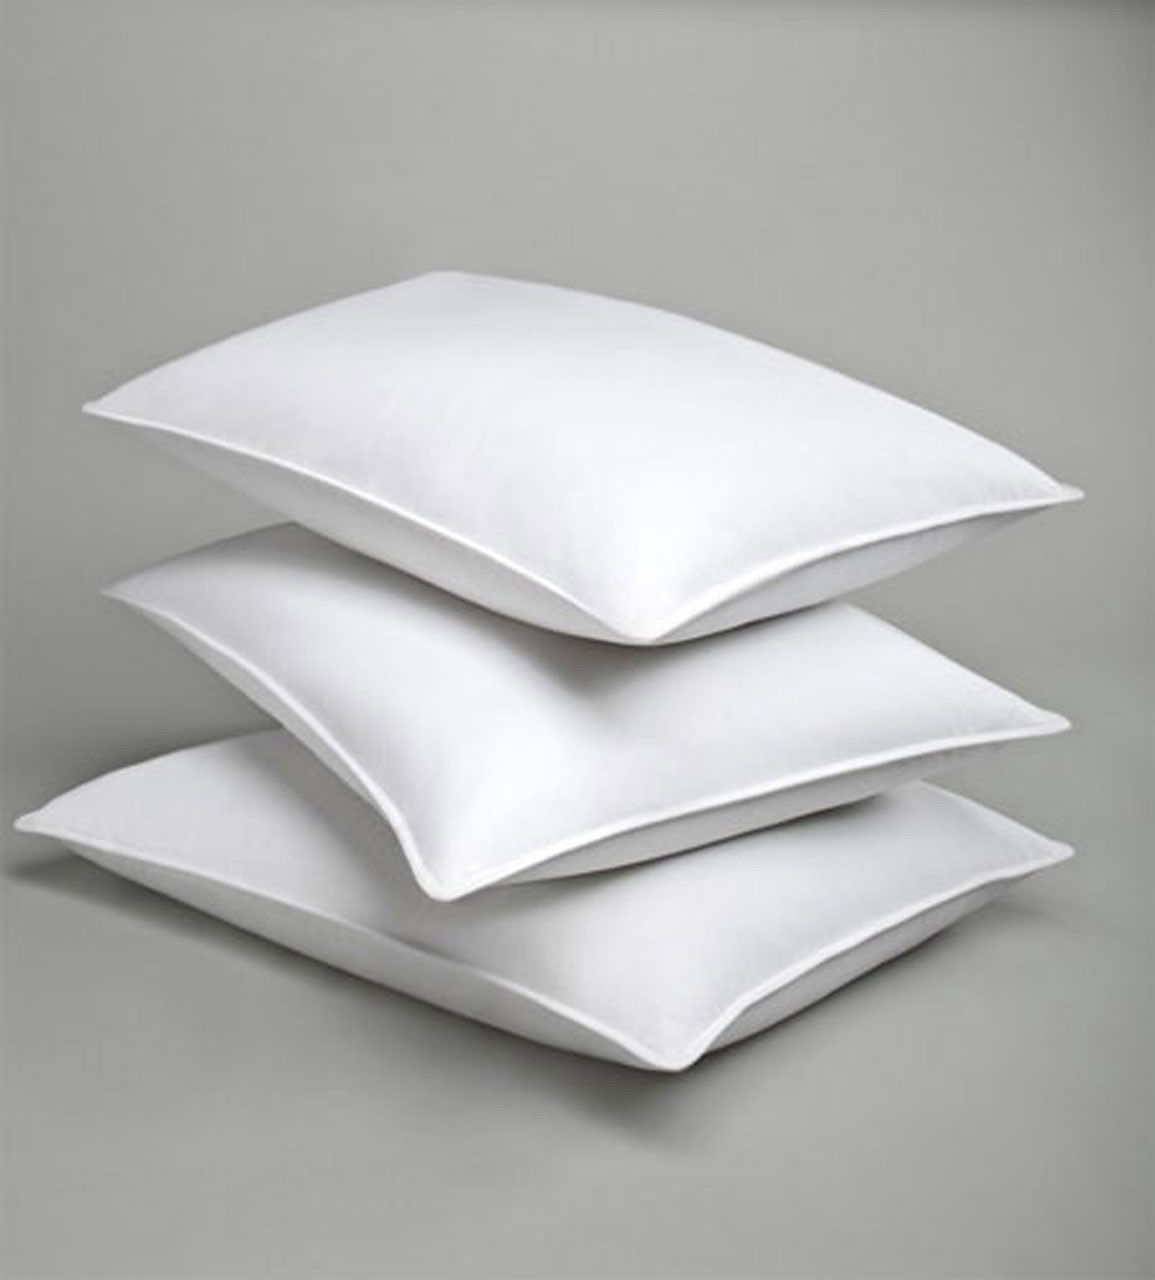 How does the design and comfort of the ChamberLoft® pillow hold up after washing?